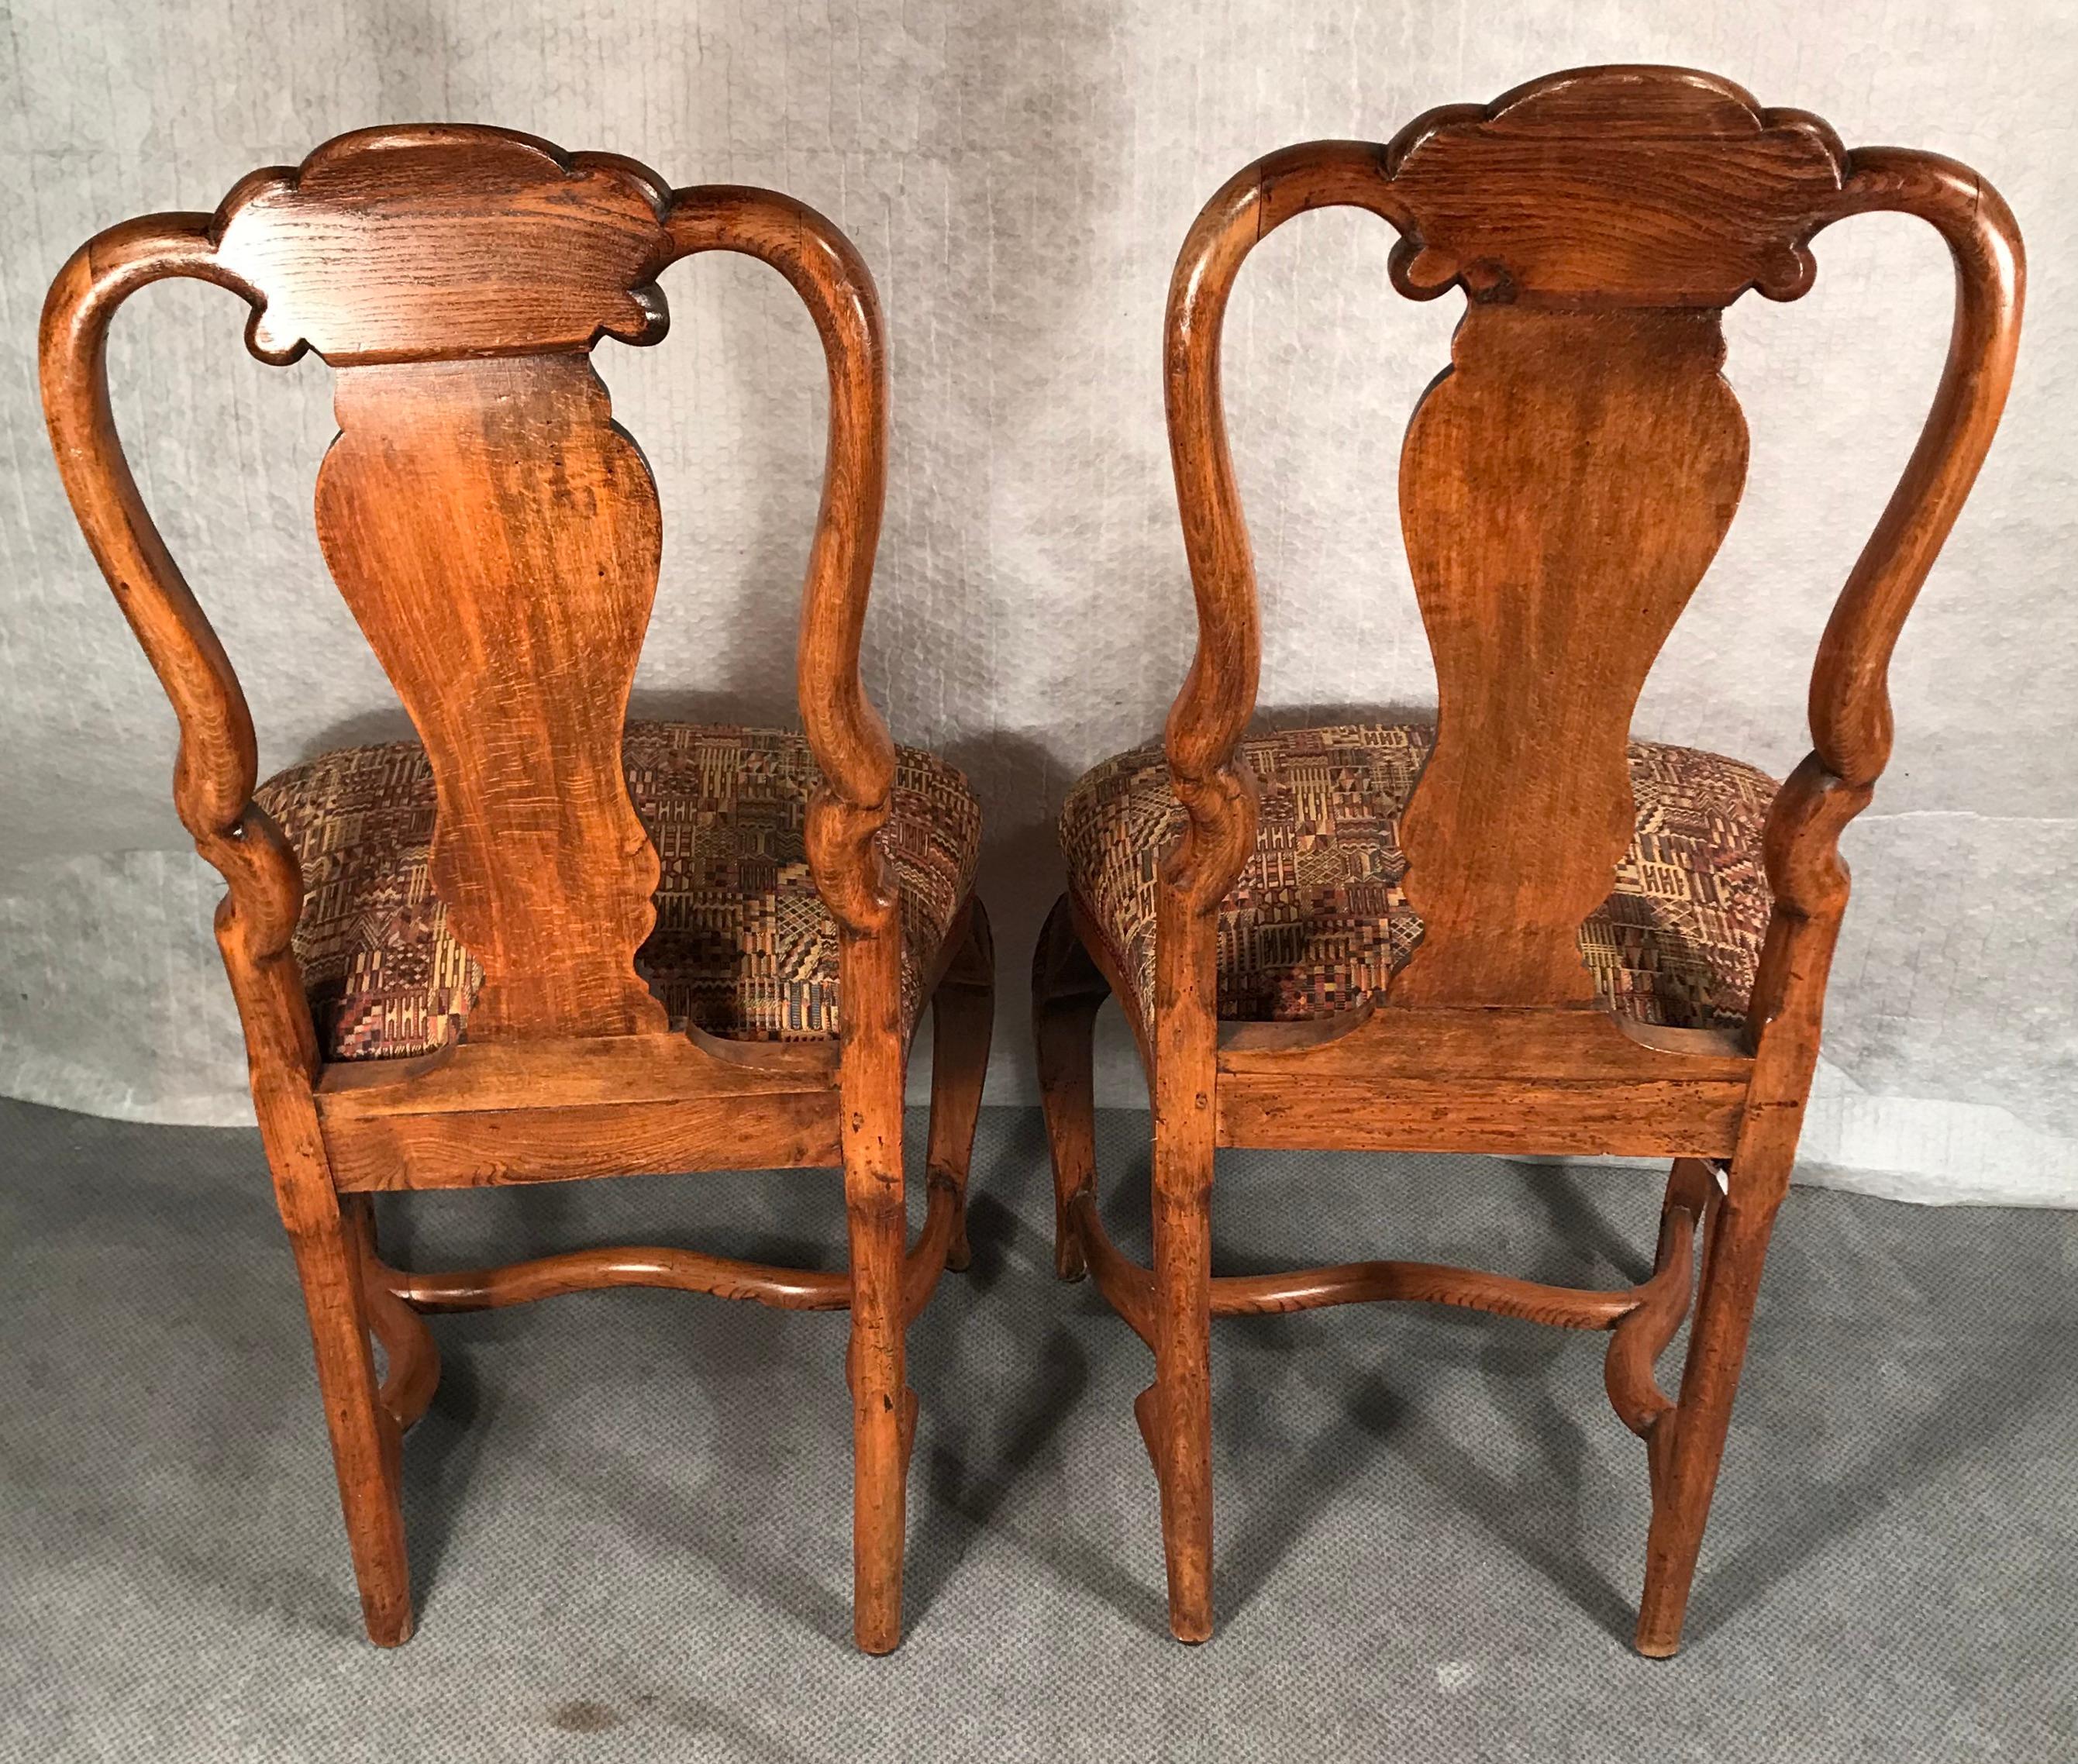 Set of Two Baroque Chairs, South German, 18th Century In Good Condition For Sale In Belmont, MA